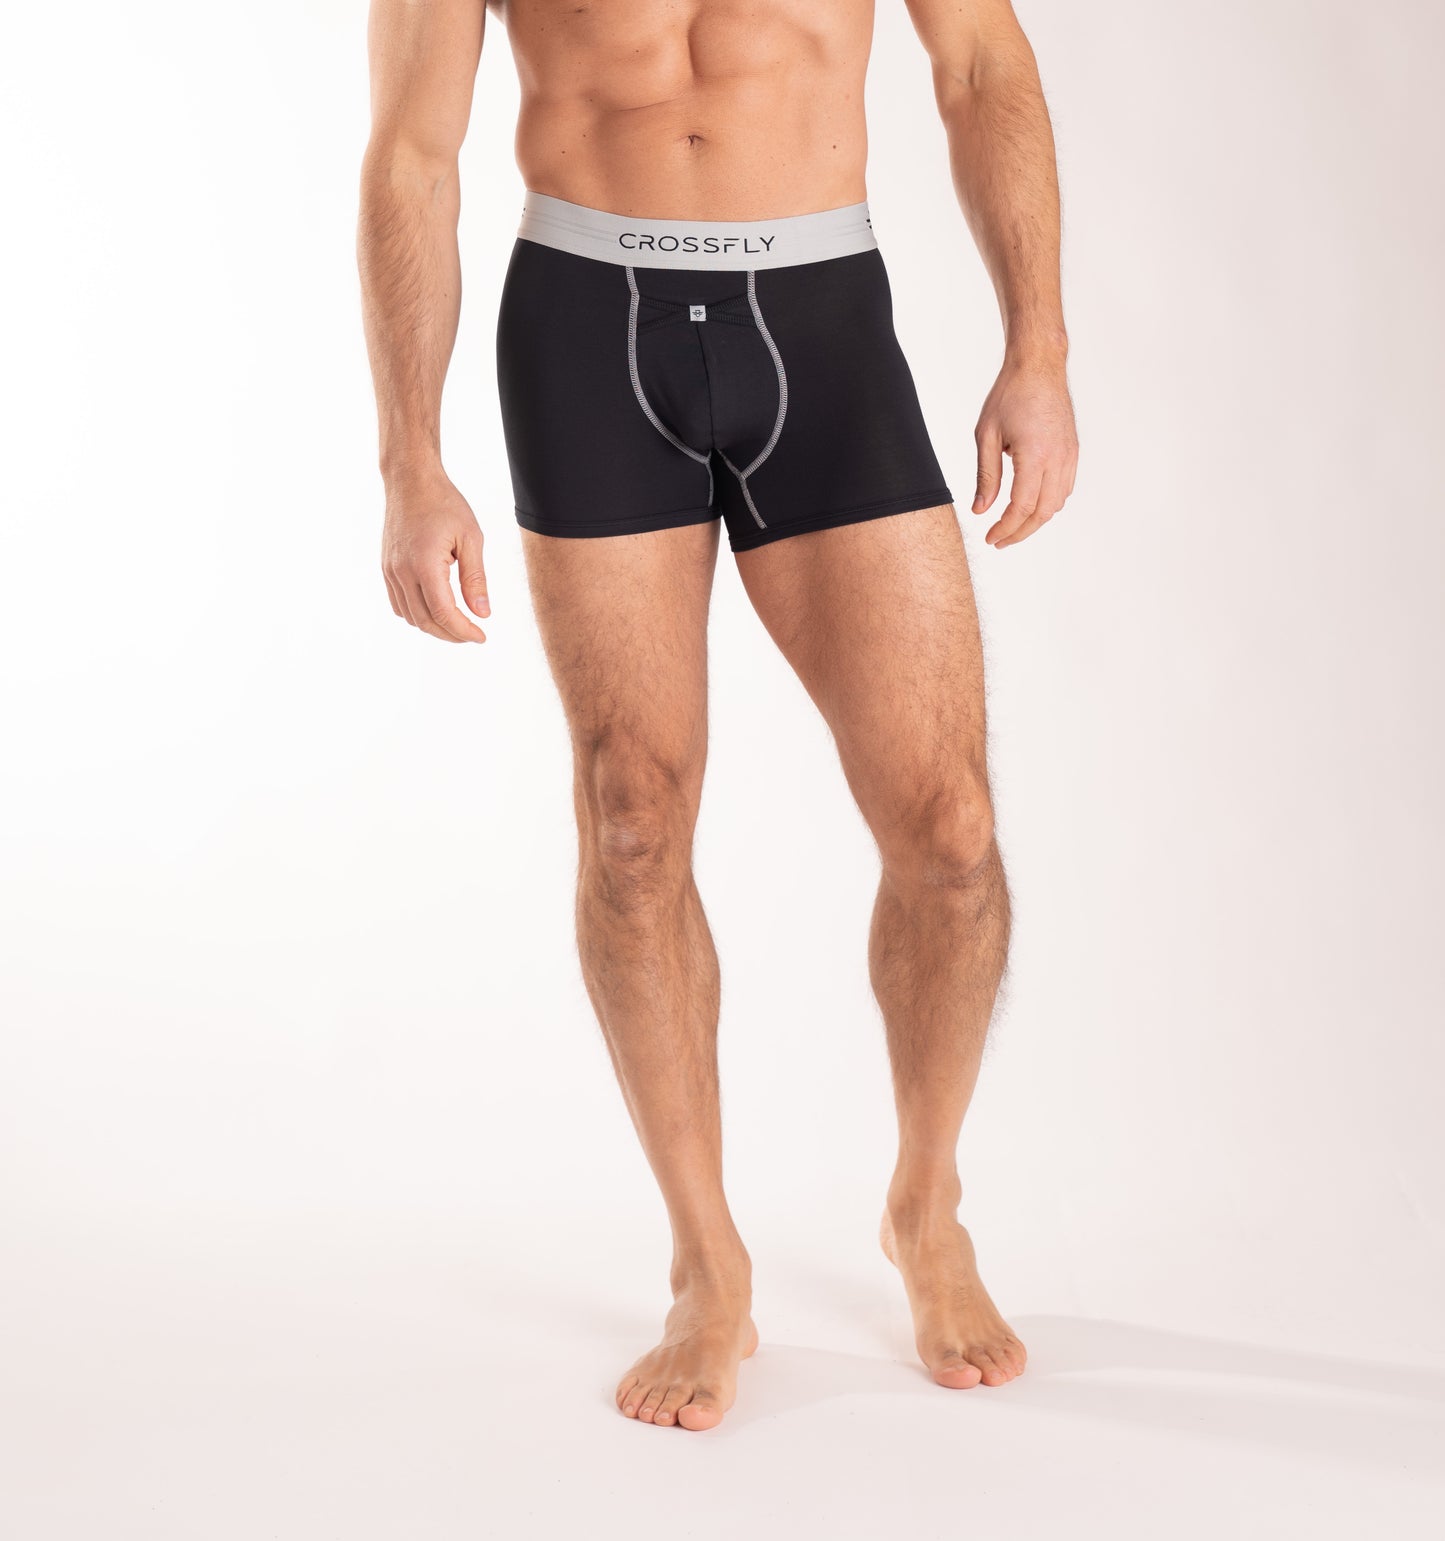 Crossfly men's IKON X 3" black / silver trunks from the Everyday series, featuring X-Fly and Coccoon internal pocket support.